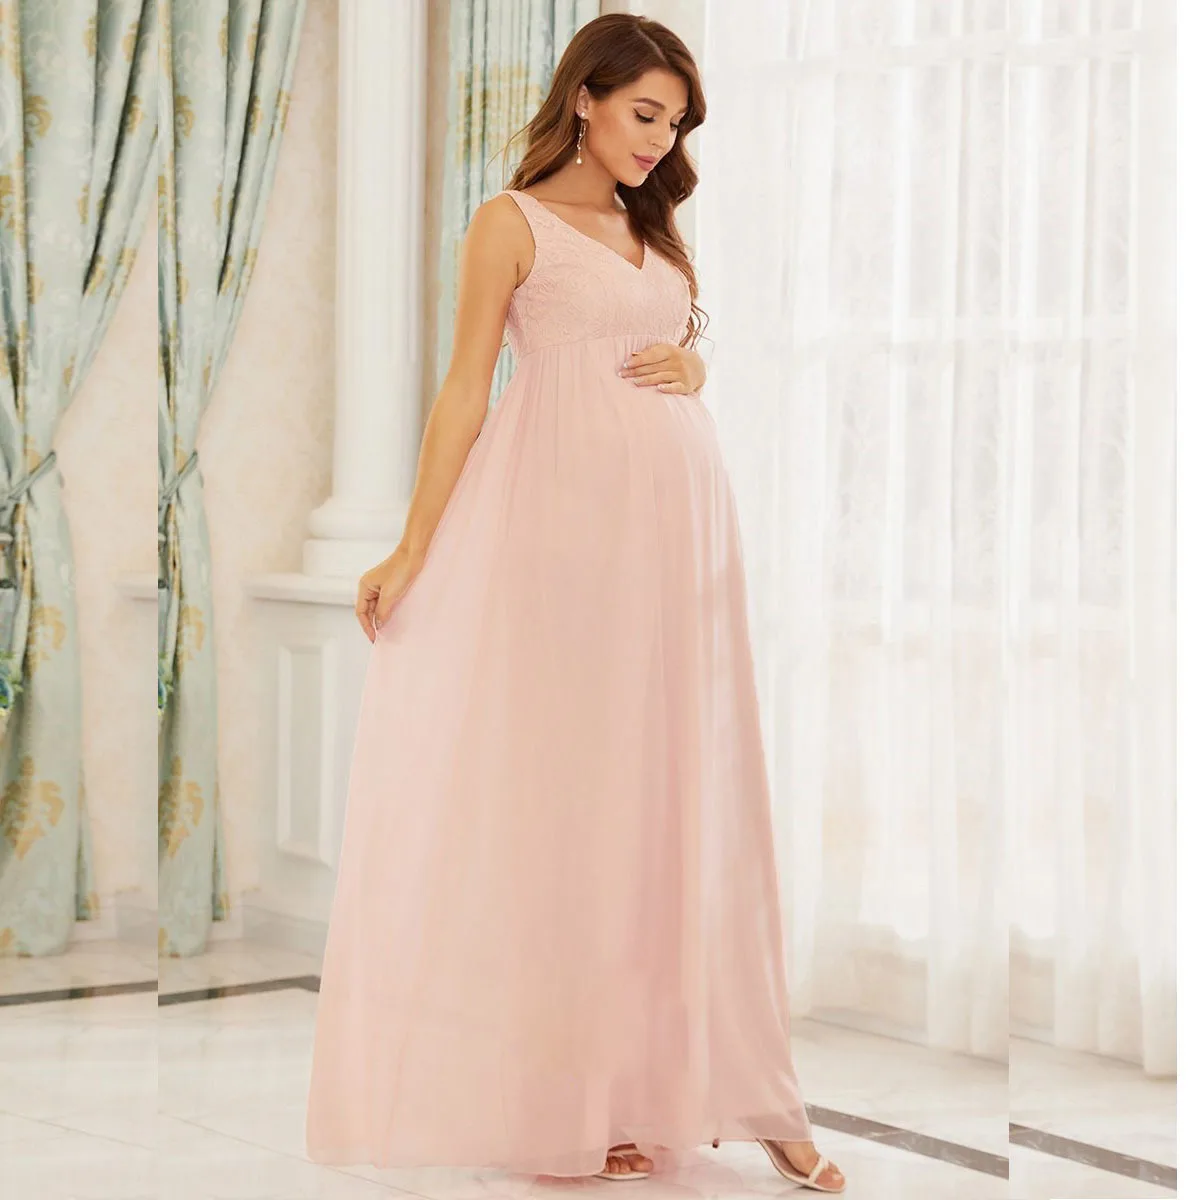 

Women's Chiffon Maternity Gown For Photoshooot V-Neck A-line Ruched Summer Maternity Dresses Bridesmaid Formal Prom Dresses